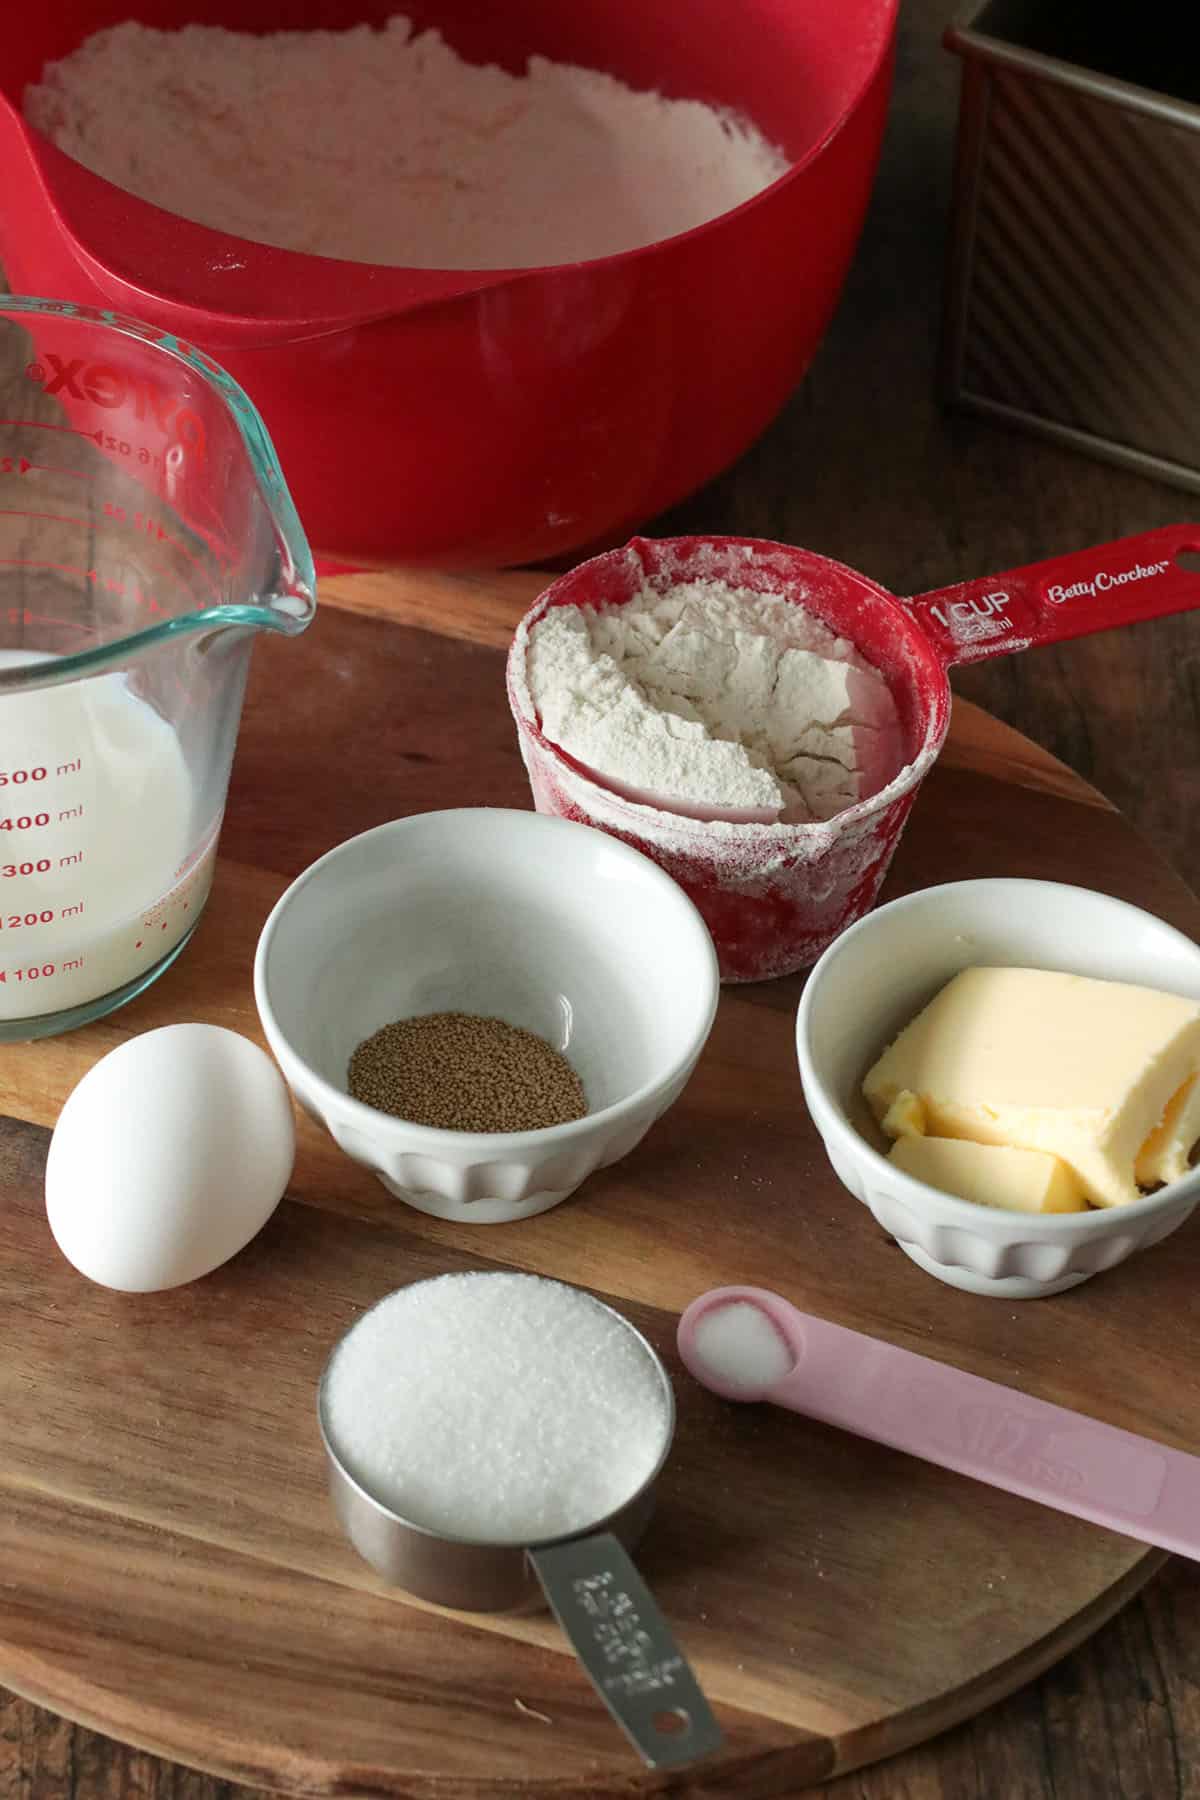 The ingredients for the bread dough.